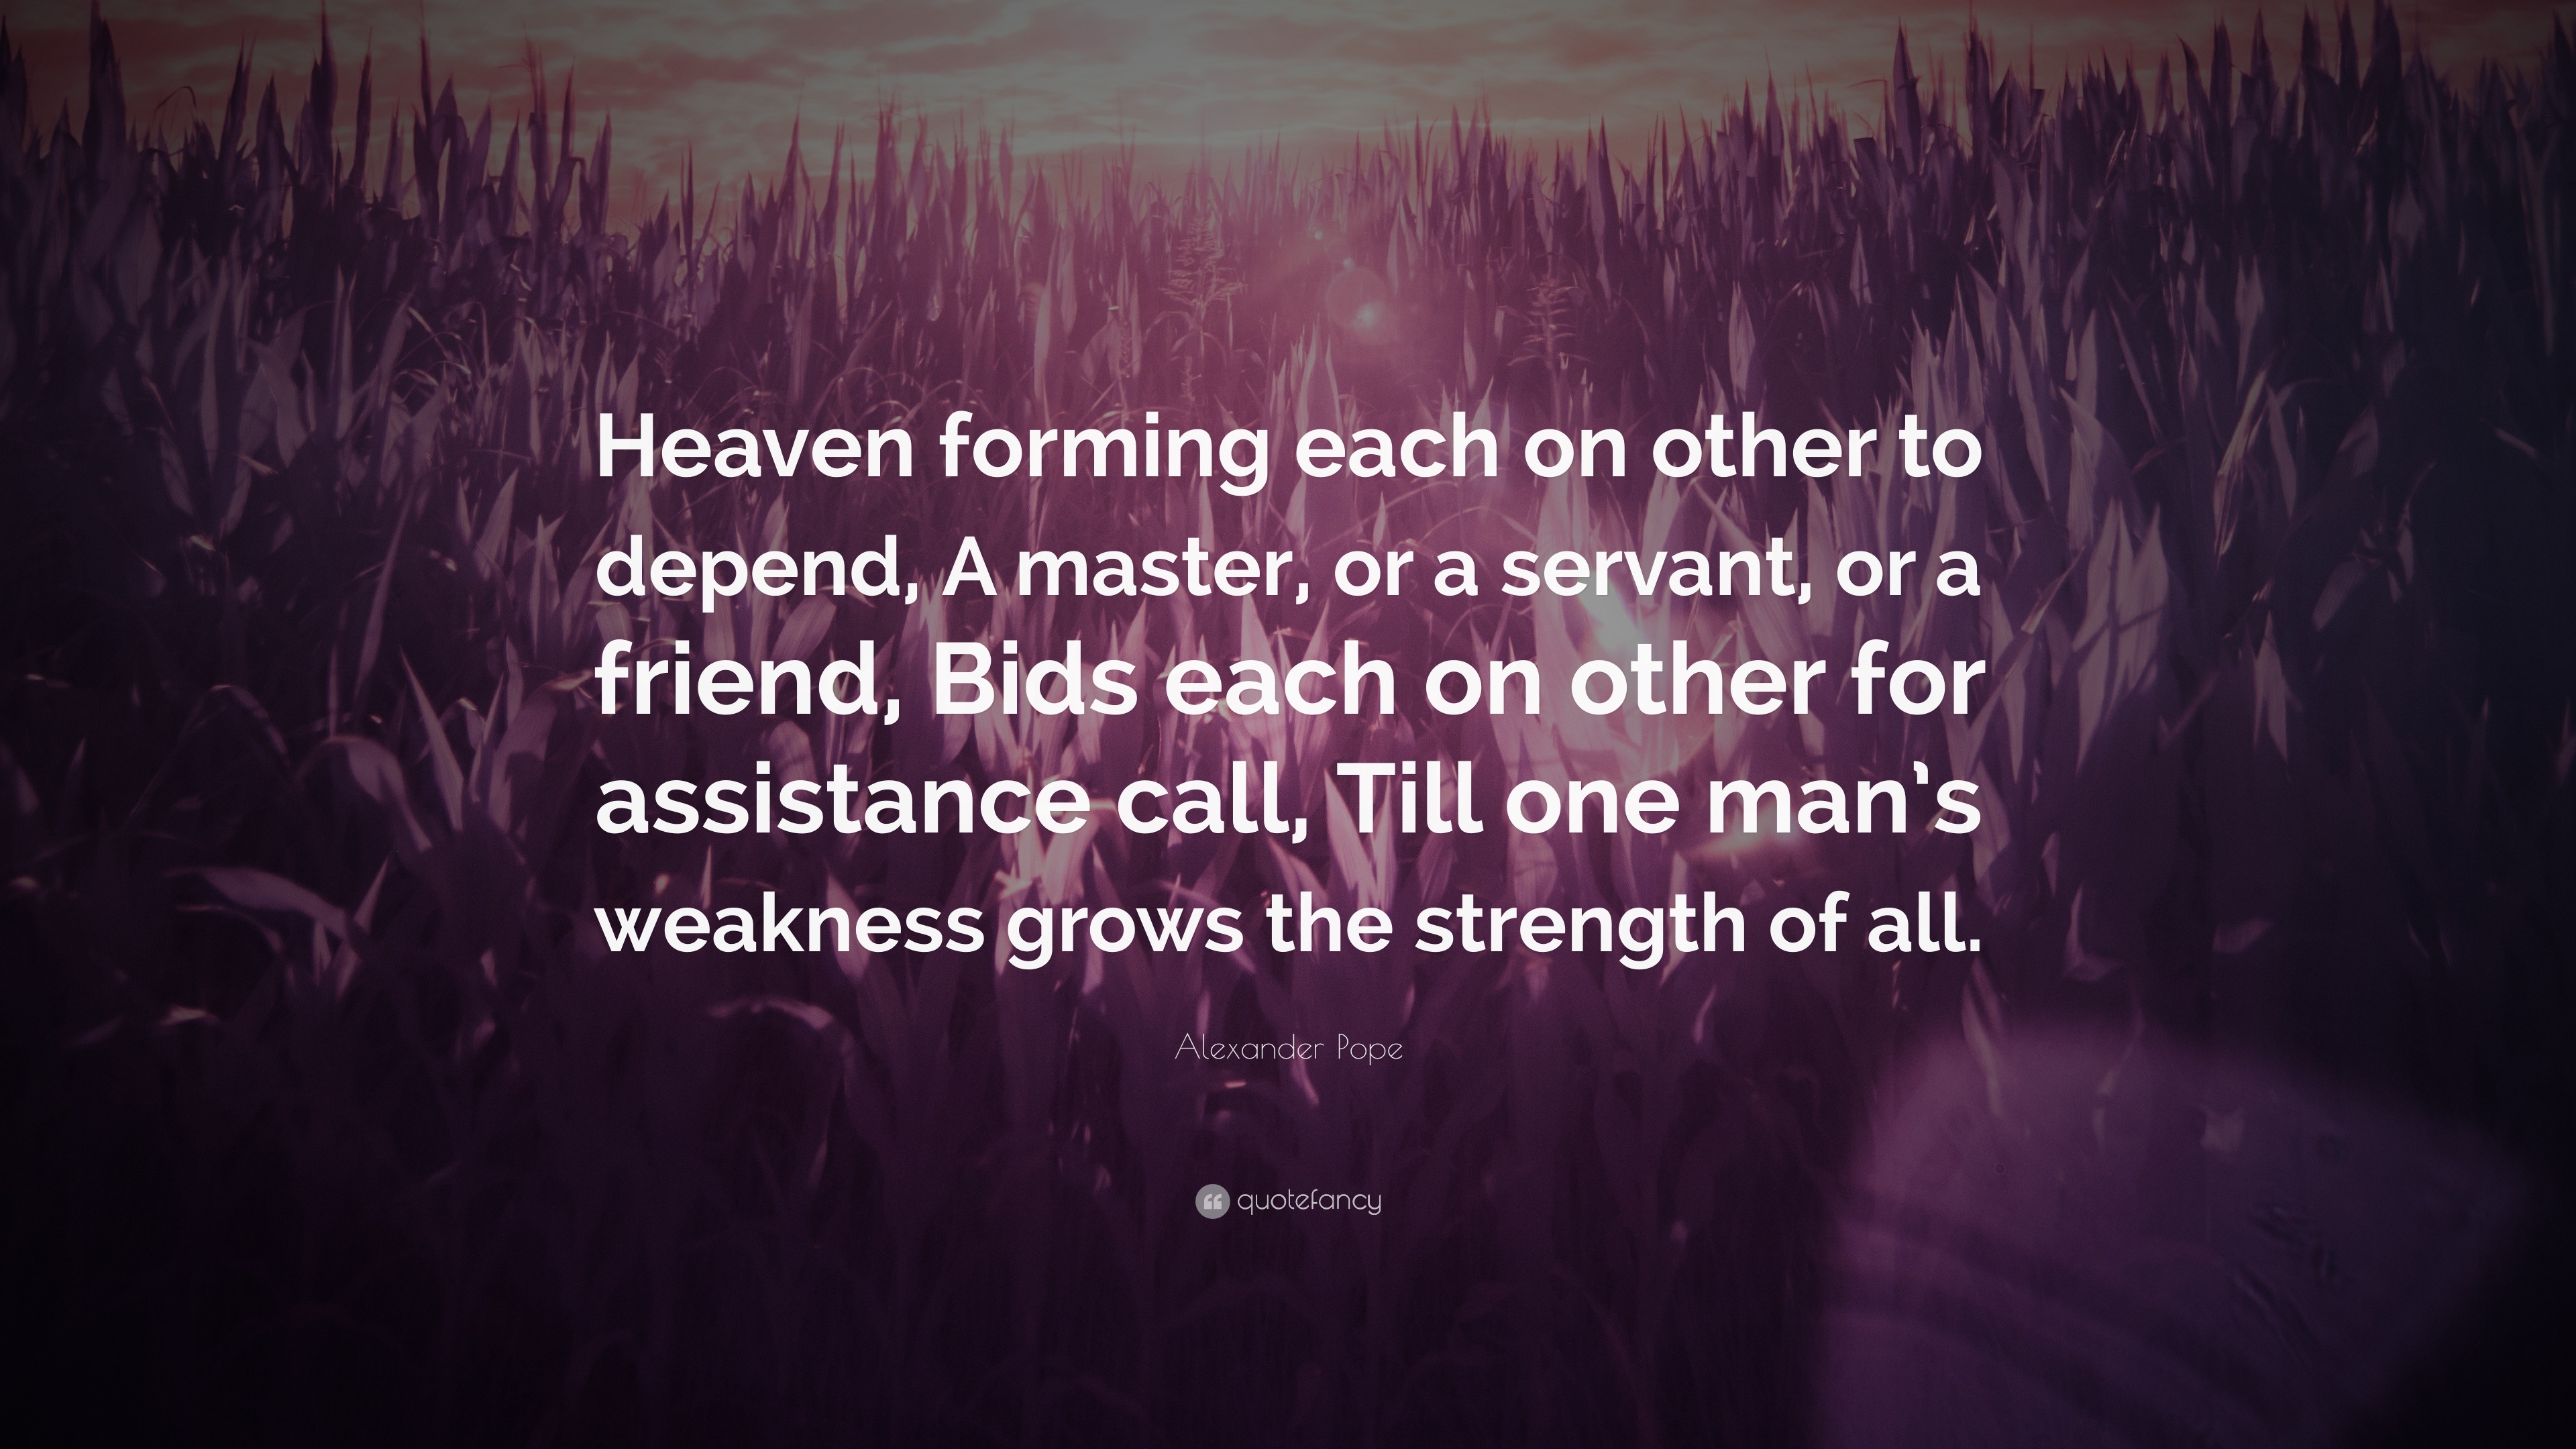 Alexander Pope Quote: “Heaven forming each on other to depend, A master ...